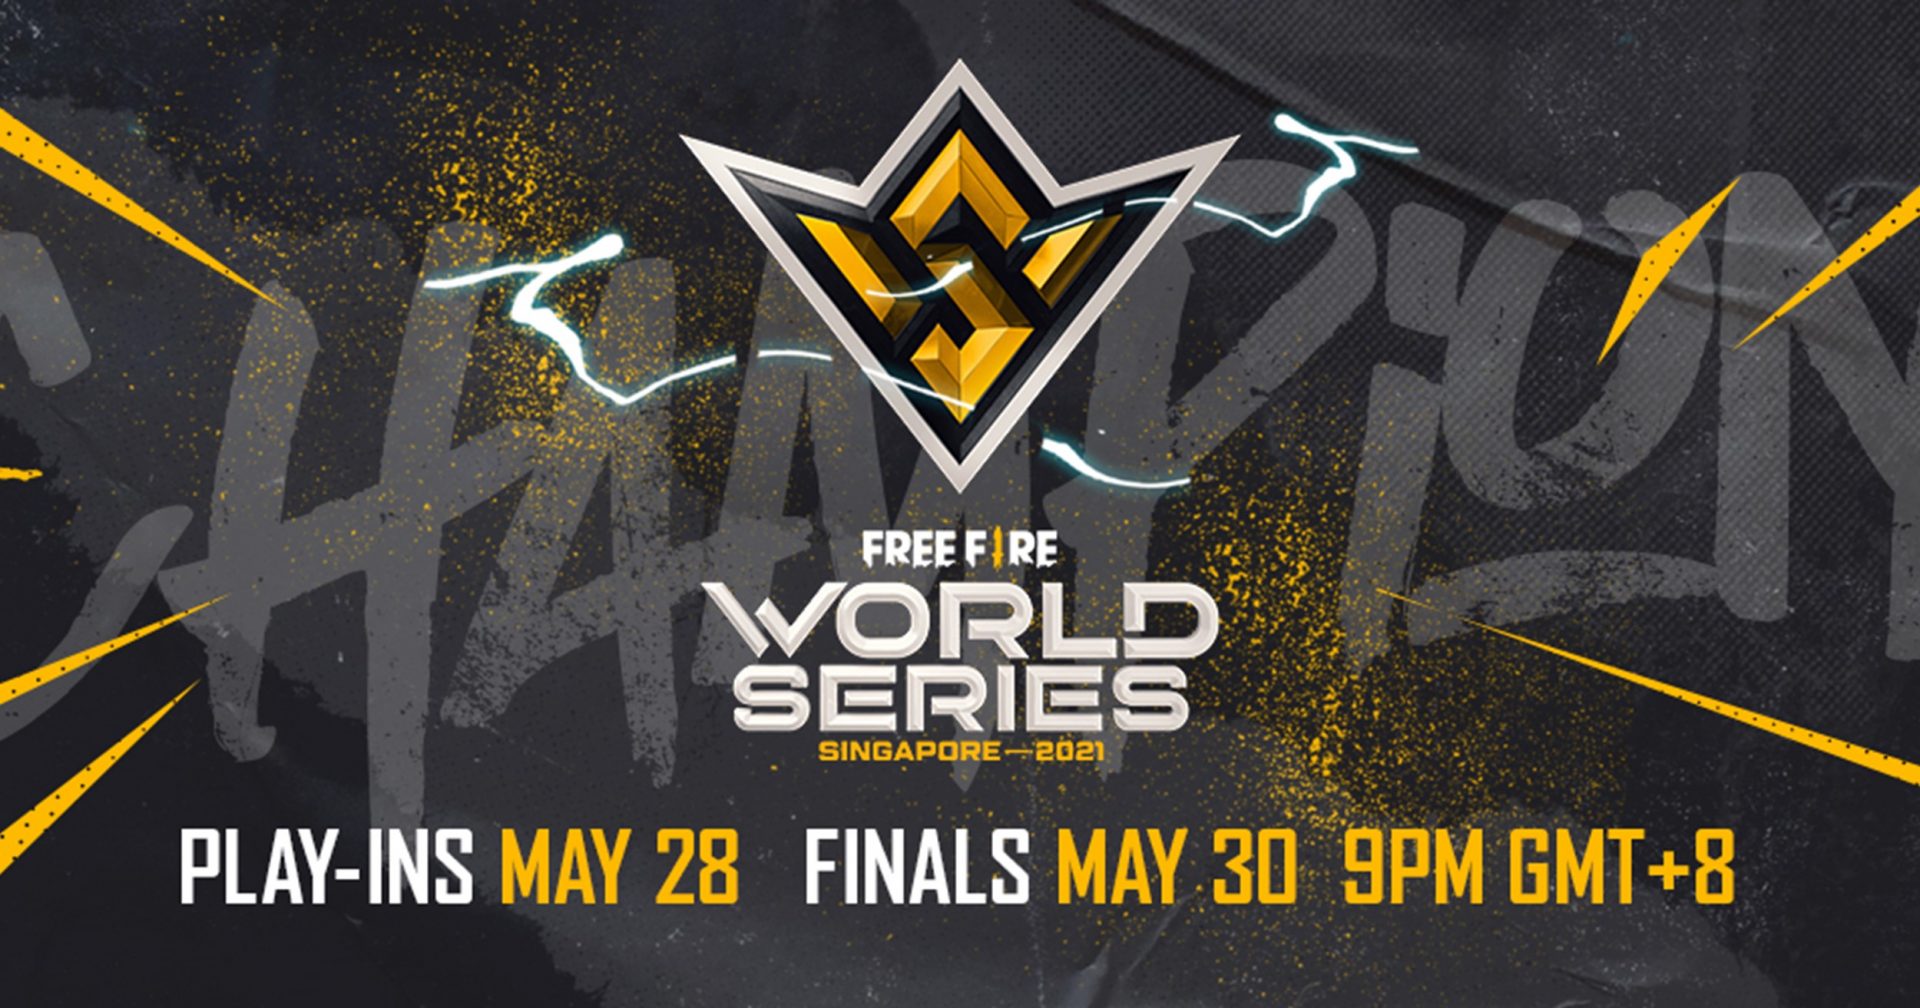 Play-Ins for the Free Fire World Series 2021 Singapore to take place on 28 May, 2021; Finals on 30 May, 2021